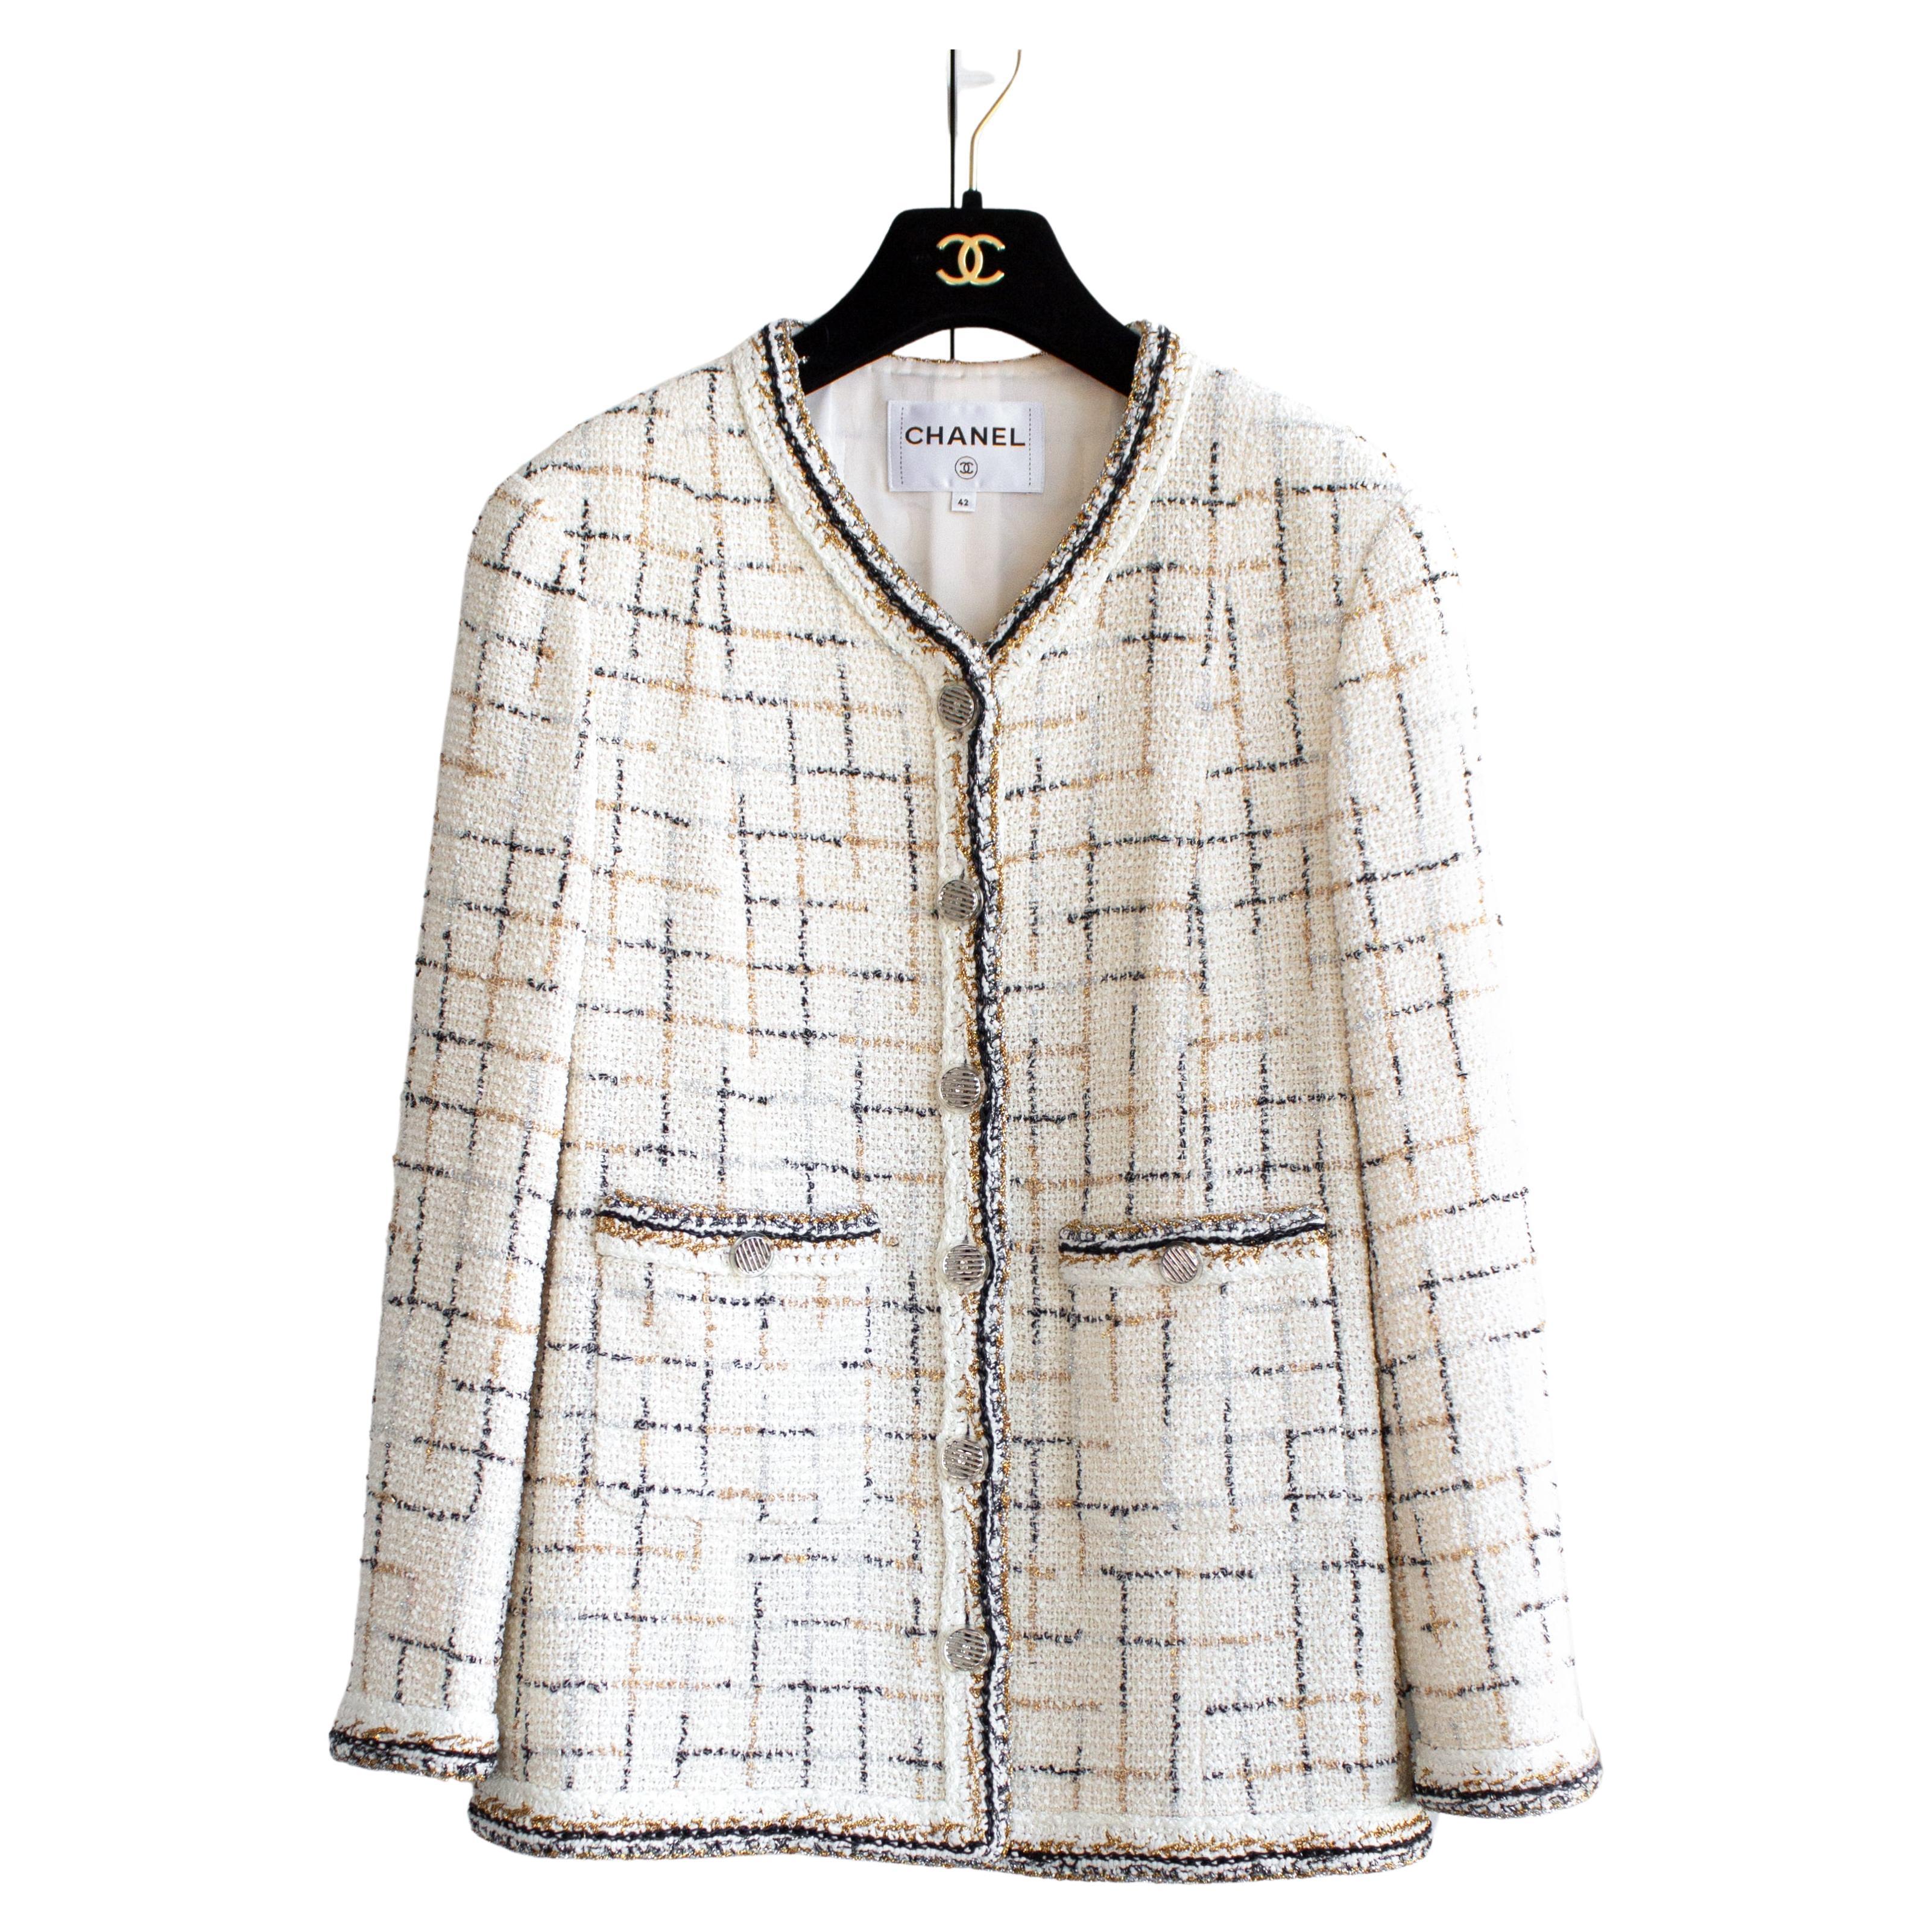  Chanel S/S 2017 Cocobot White Gold Silver Black Fantasy Check Tweed 17S Jacket For Sale